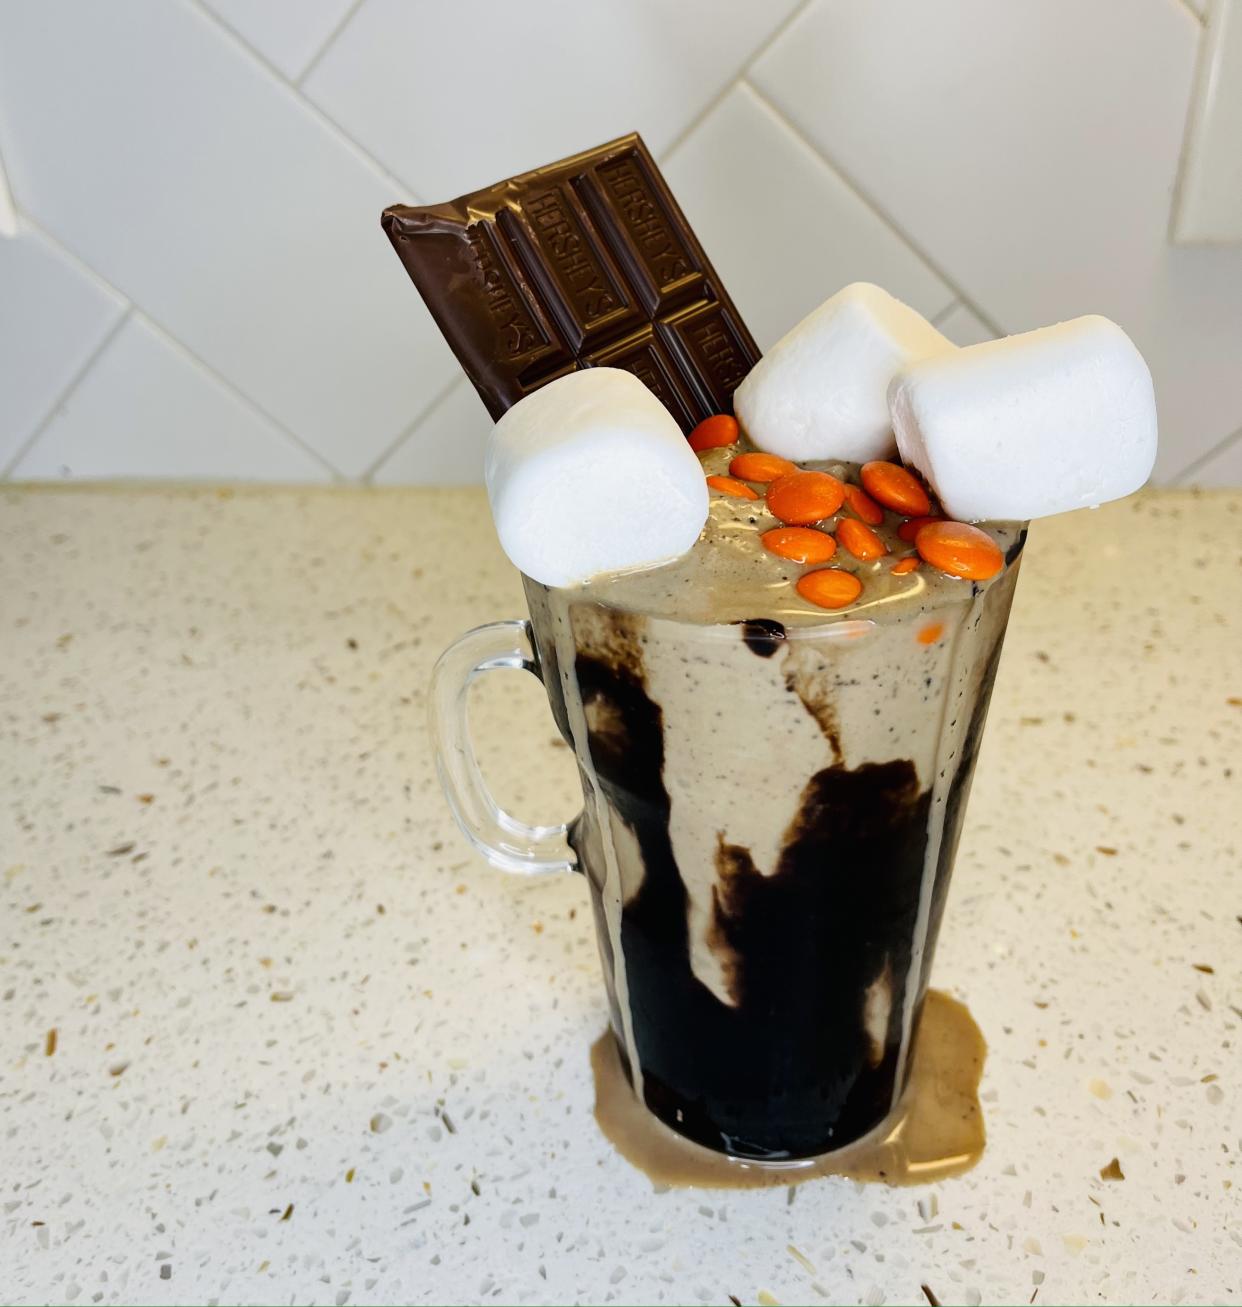 My at-home attempt at re-creating the Hersheypark King Size Shake. (Photo: Carly Caramanna)